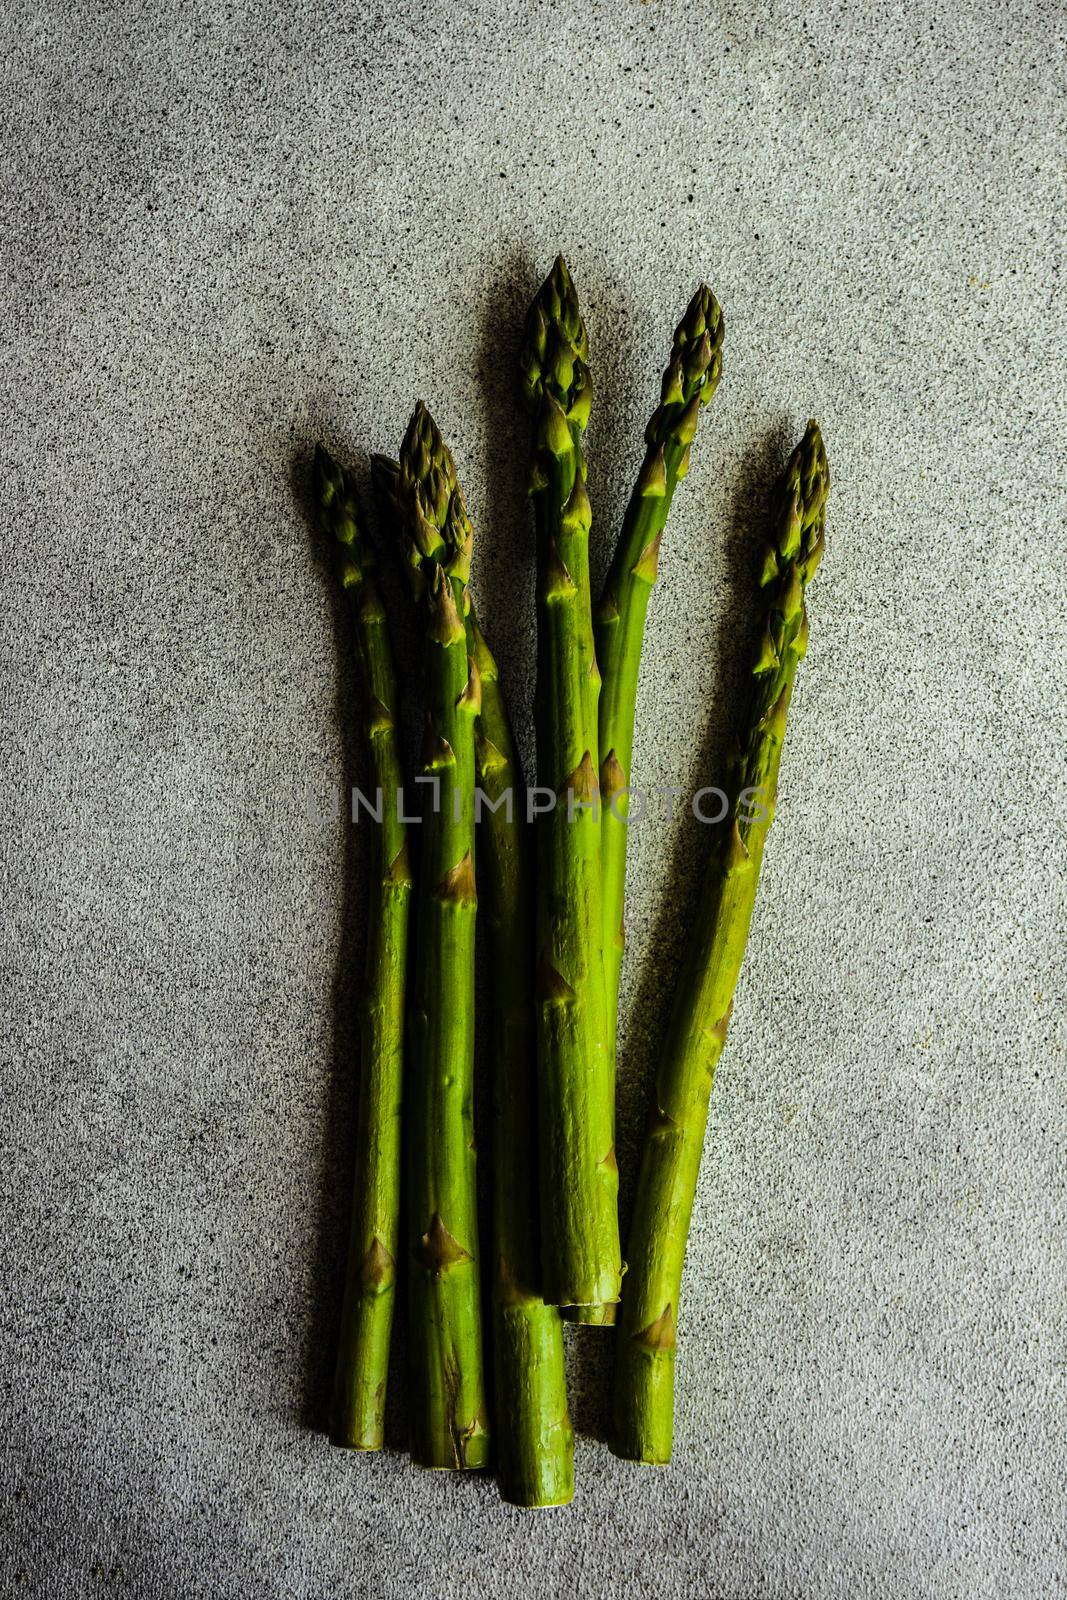 Organic food concept with asparagus on stone table with copy space